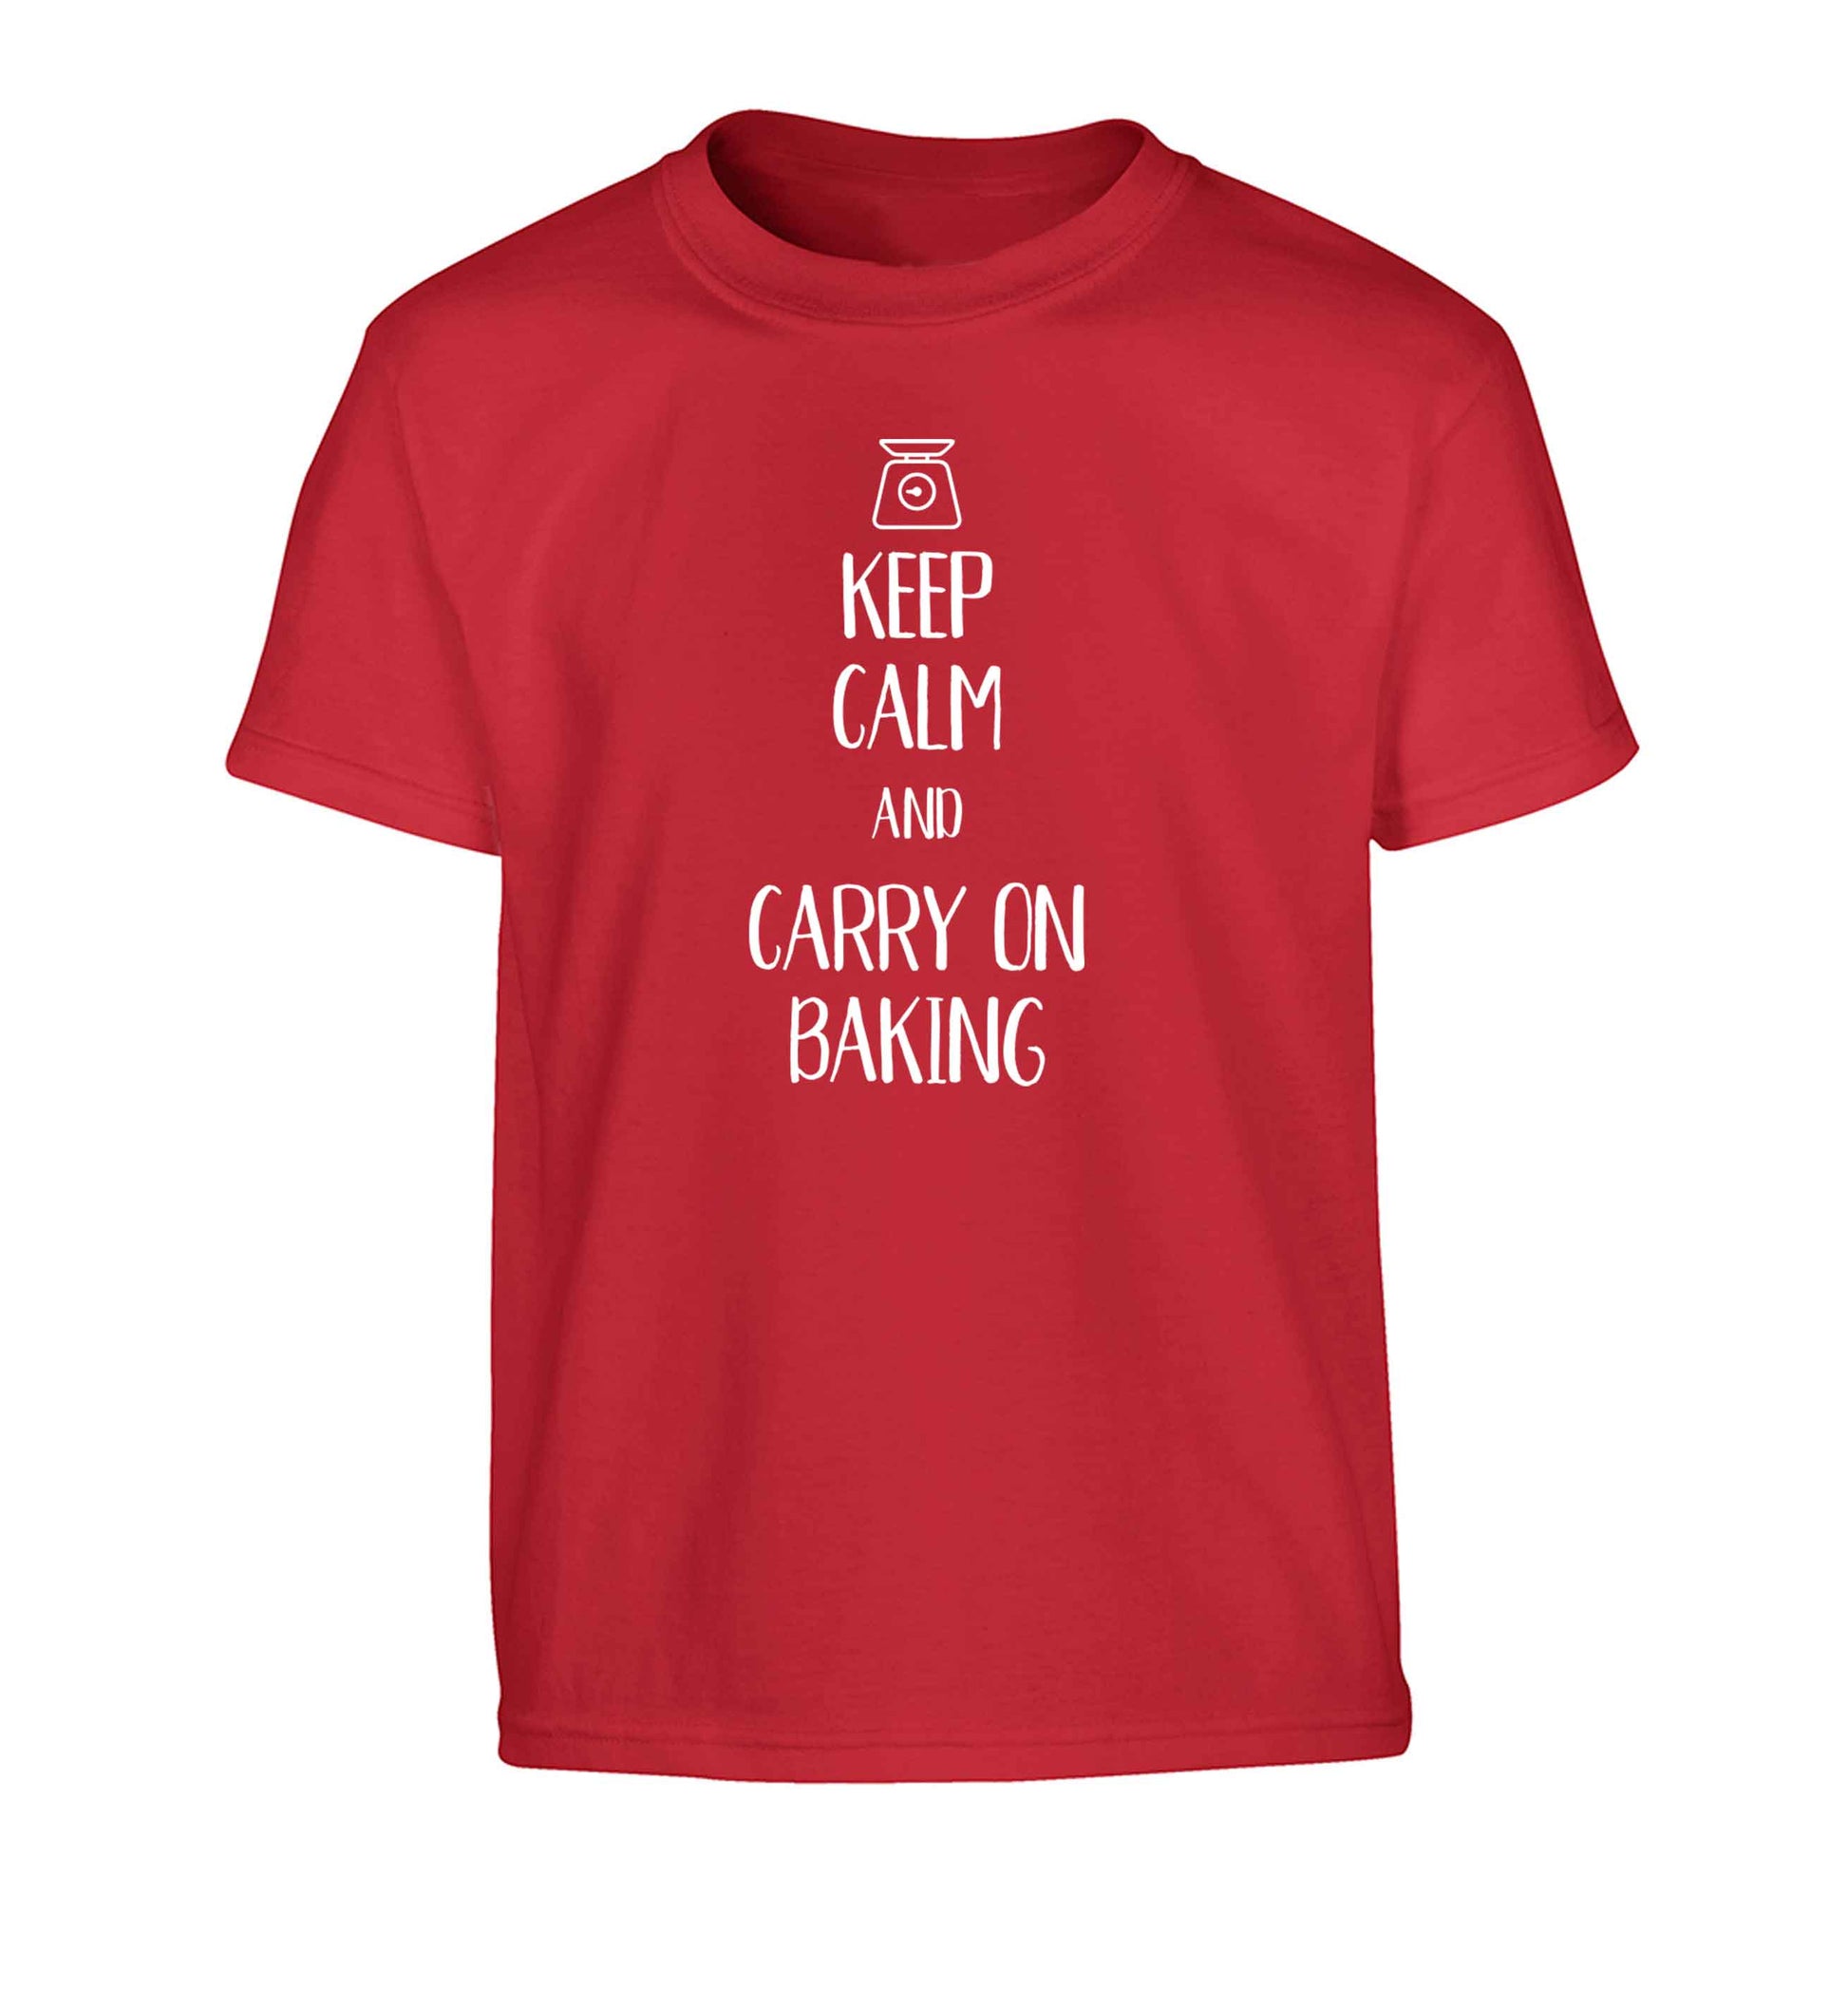 Keep calm and carry on baking Children's red Tshirt 12-13 Years